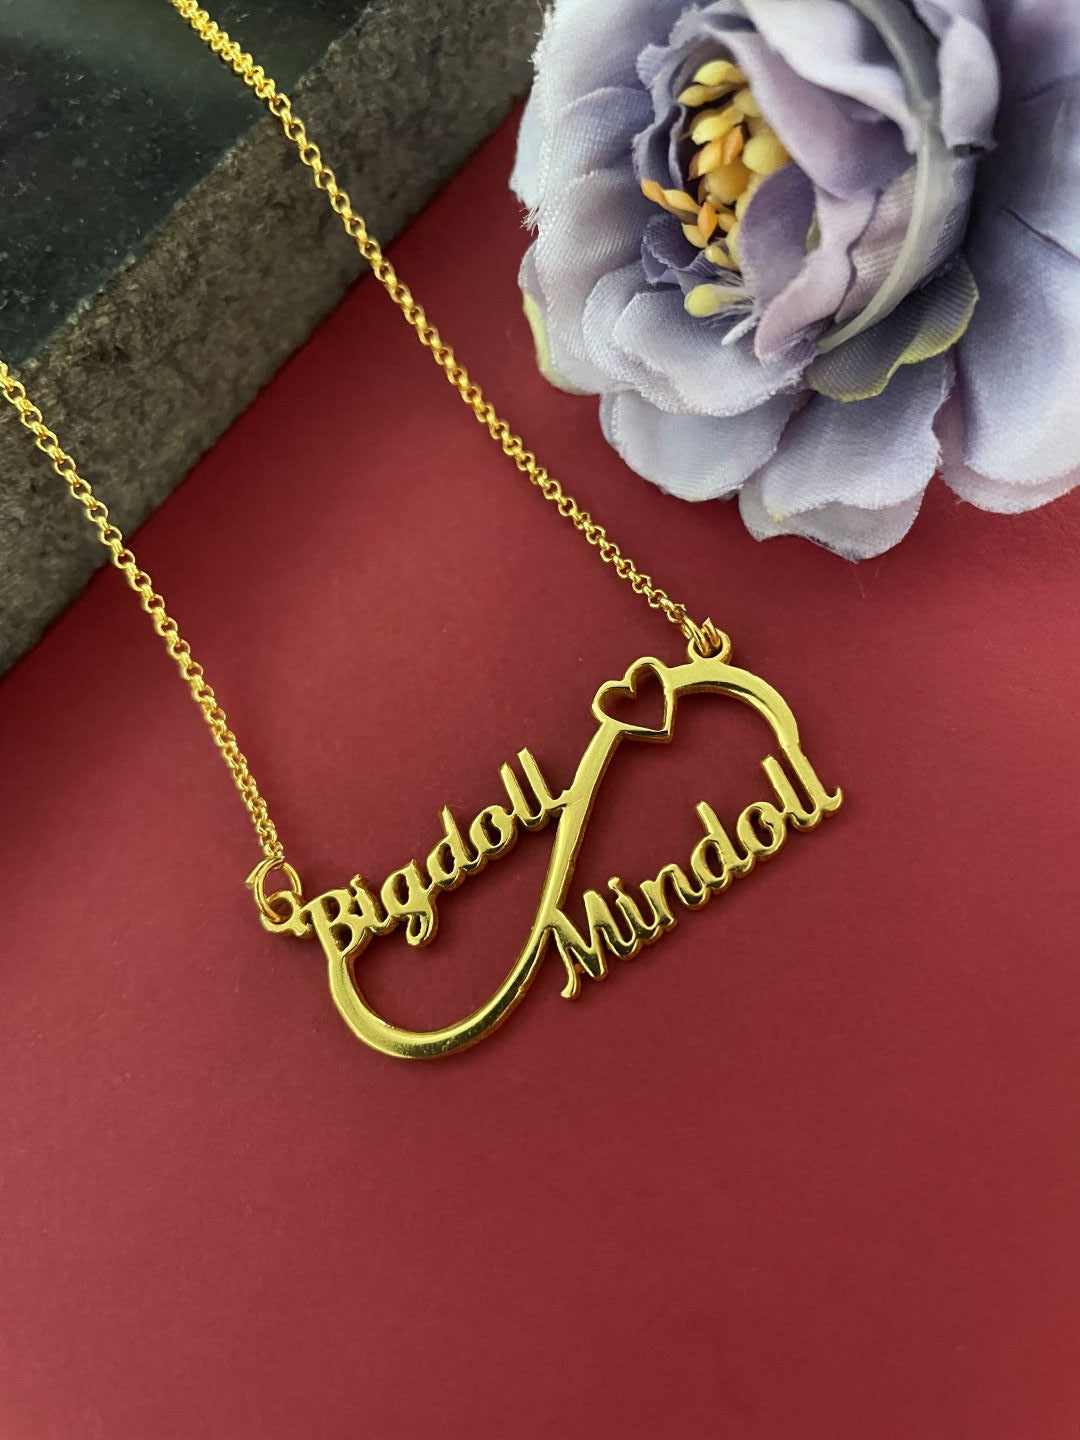 Couples Jewelry - My Name Necklace Canada